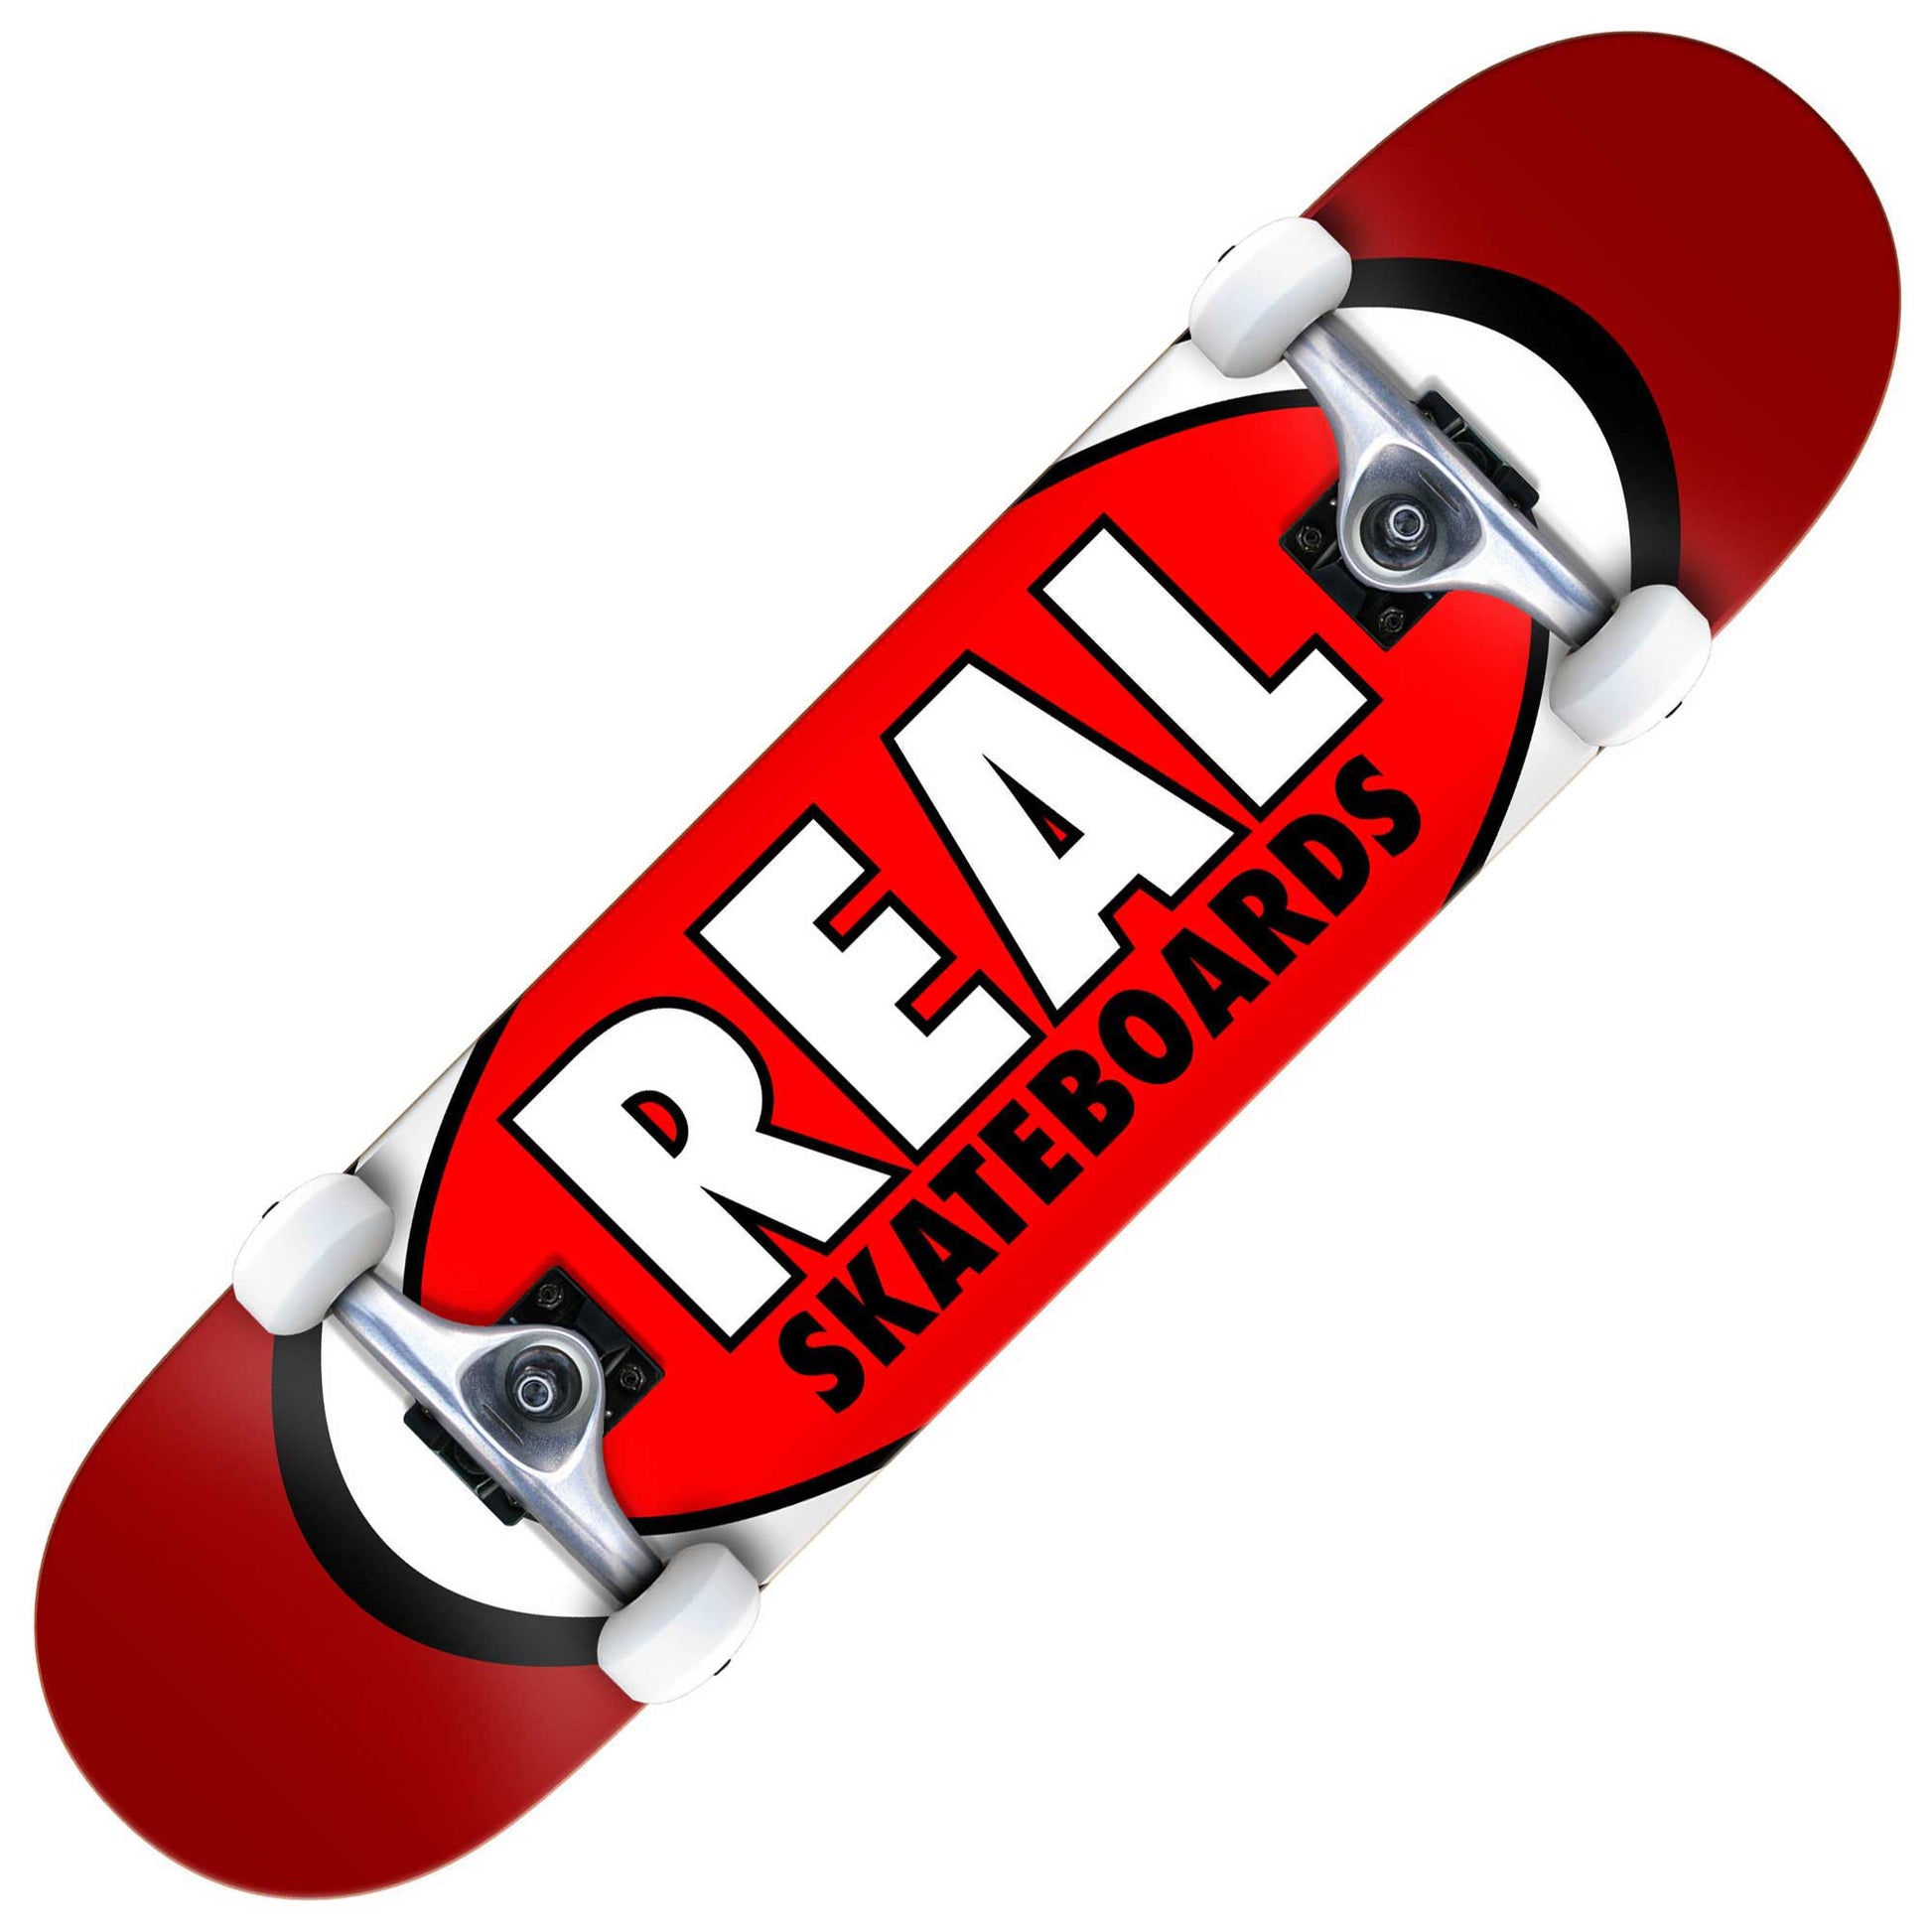 Real Classic Oval Red Mini Complete (7.3) - Tiki Room Skateboards - 1